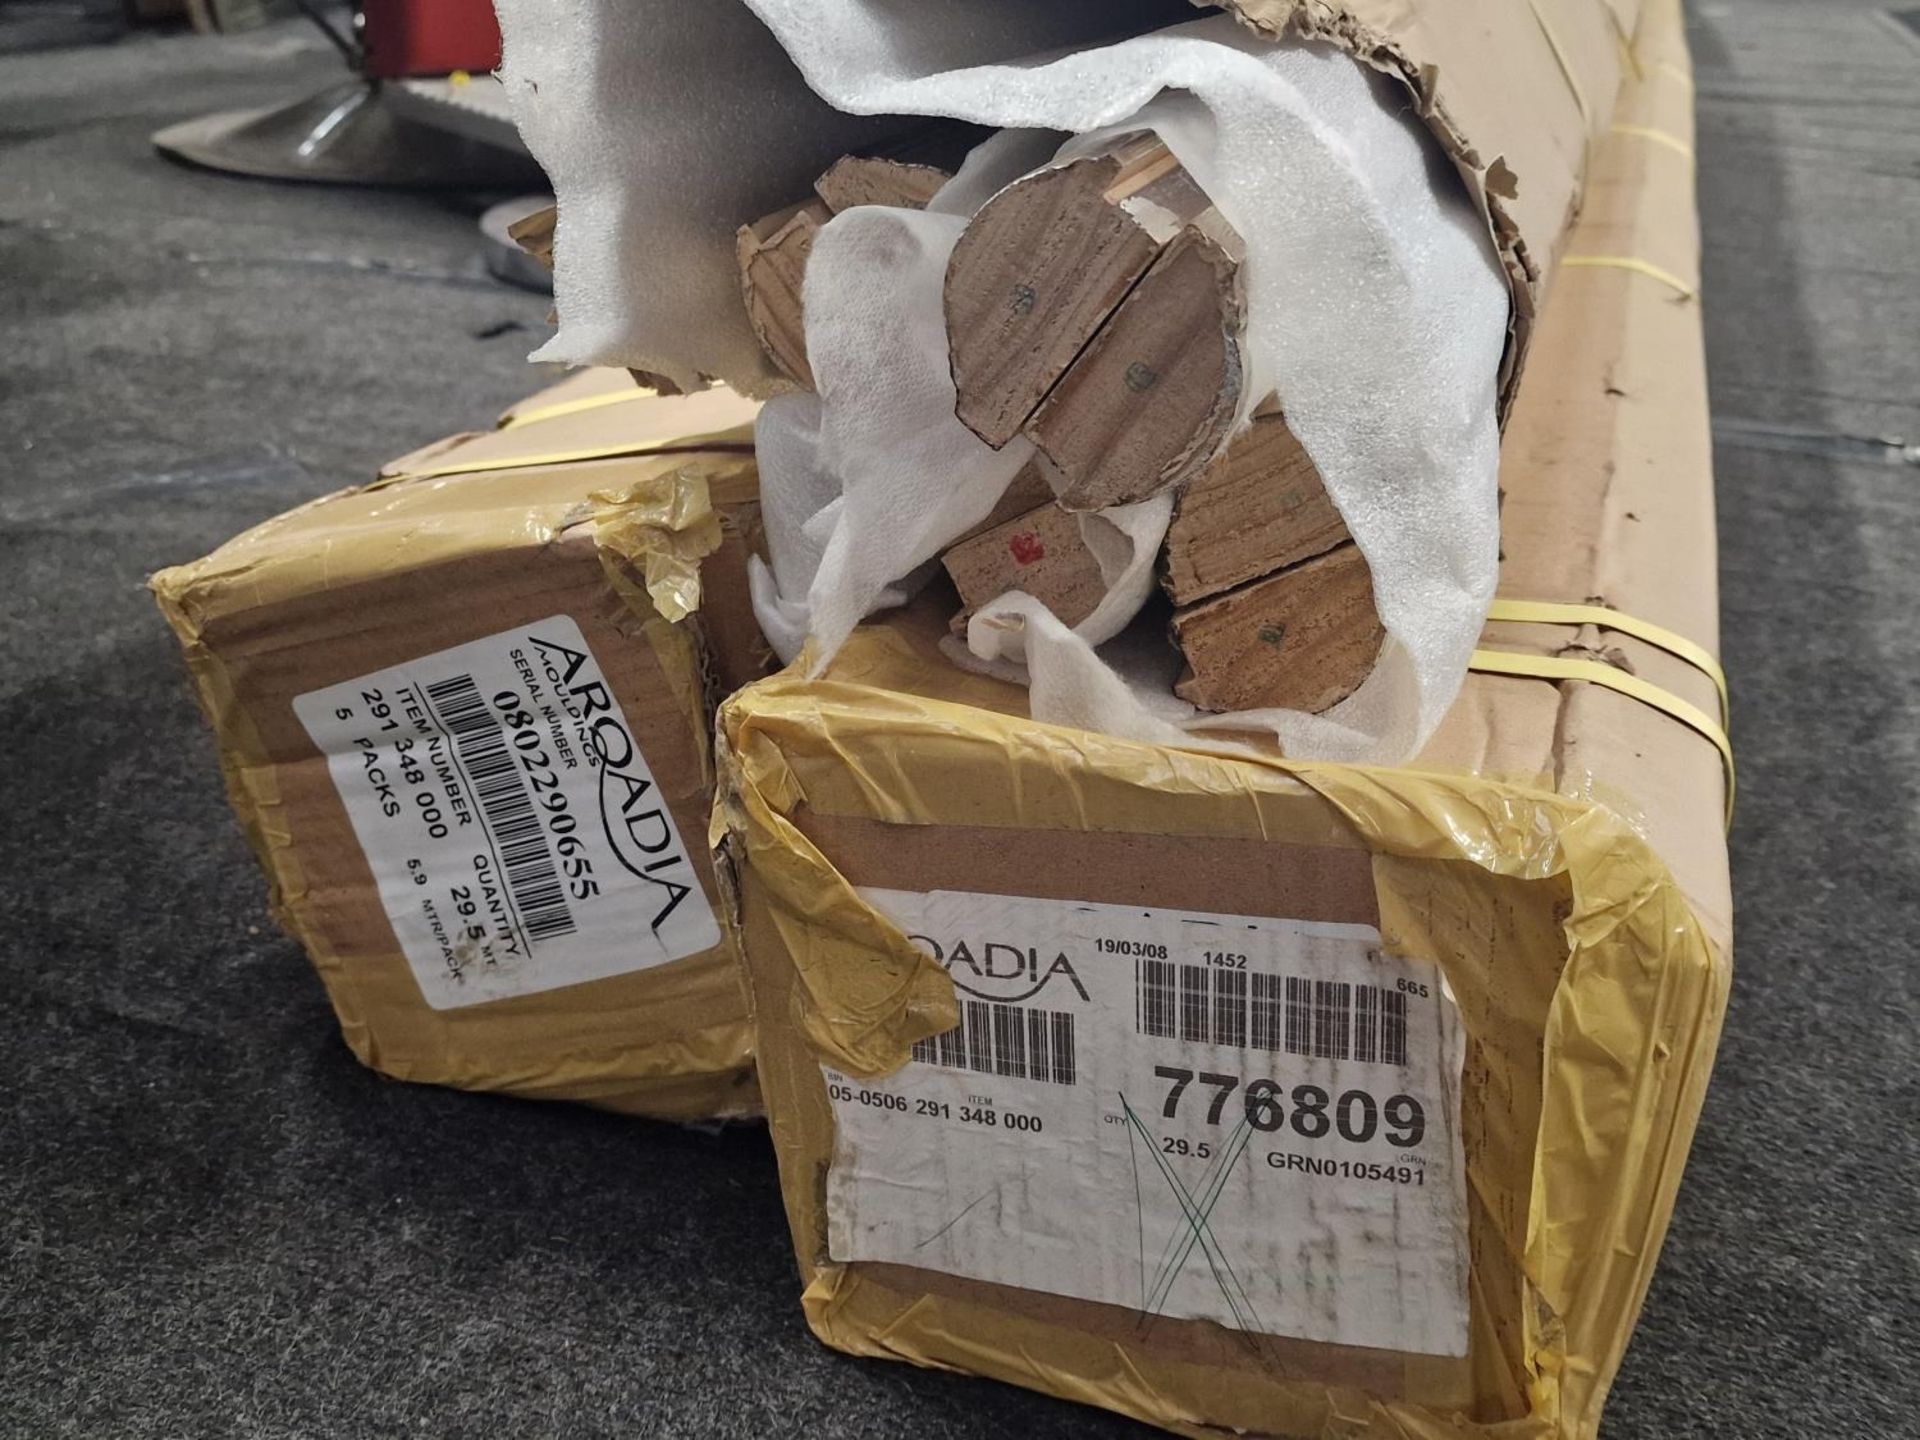 Three boxes of Arqadia picture frame wood mouldings 300cm in length. - Image 2 of 3